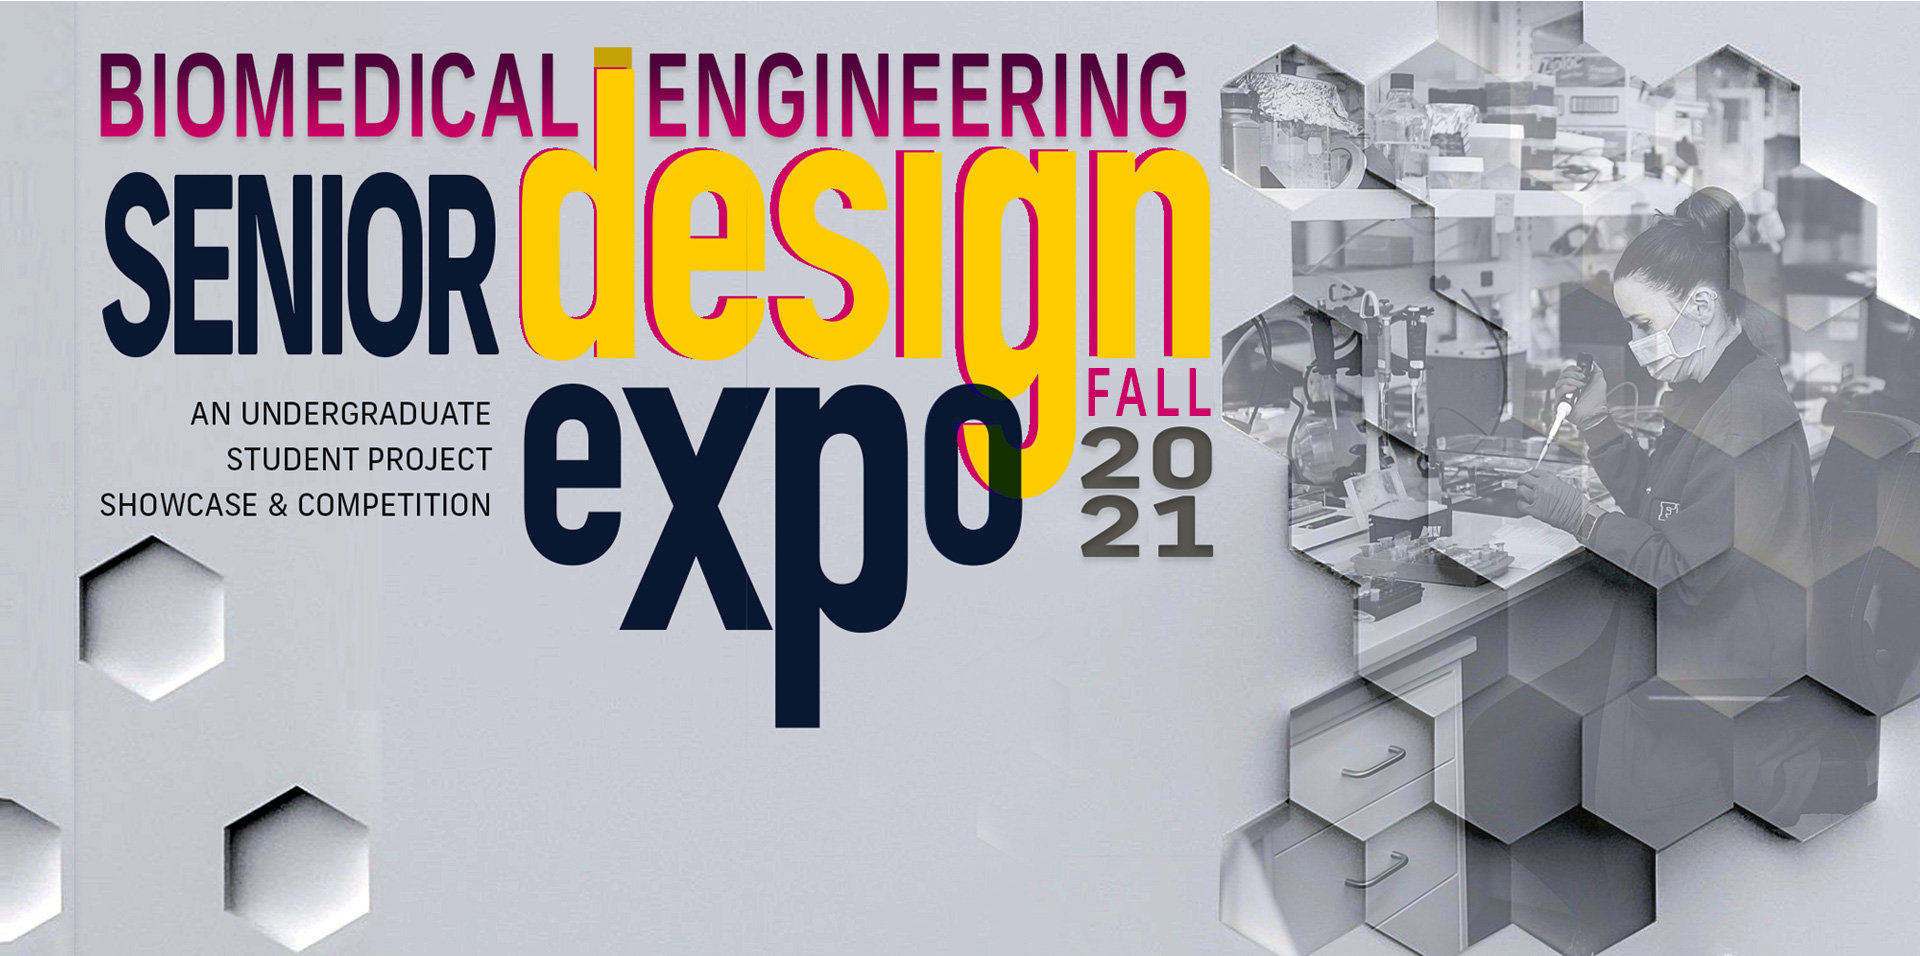 Fall 2021 Biomedical Engineering Senior Design Project Expo & Competition